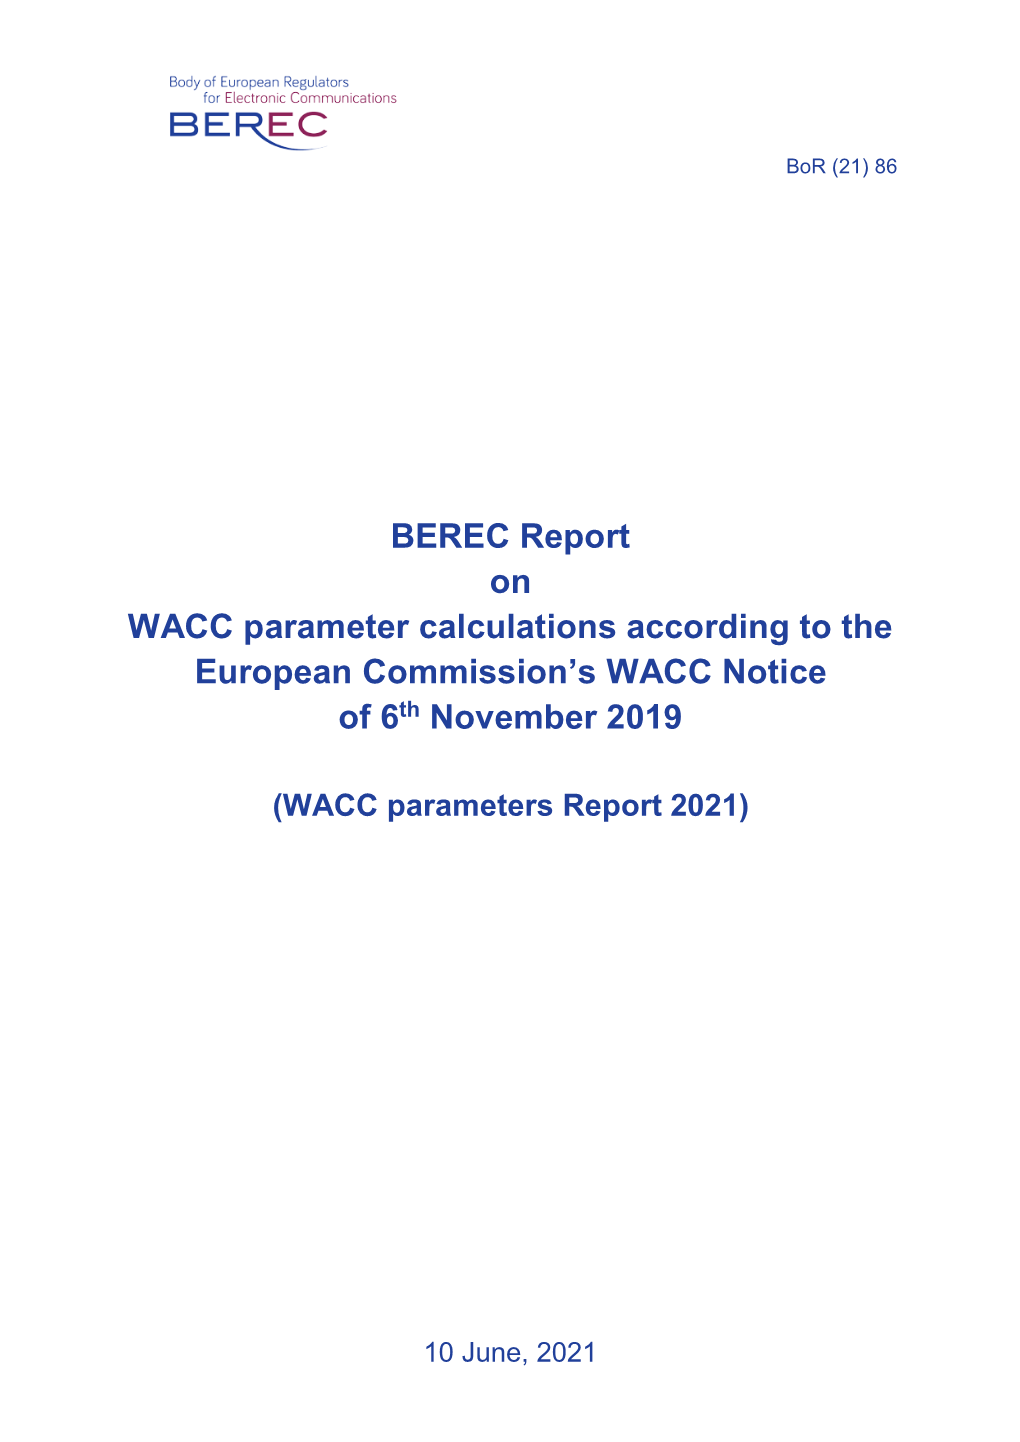 BEREC Report on WACC Parameter Calculations According to the European Commission’S WACC Notice of 6Th November 2019